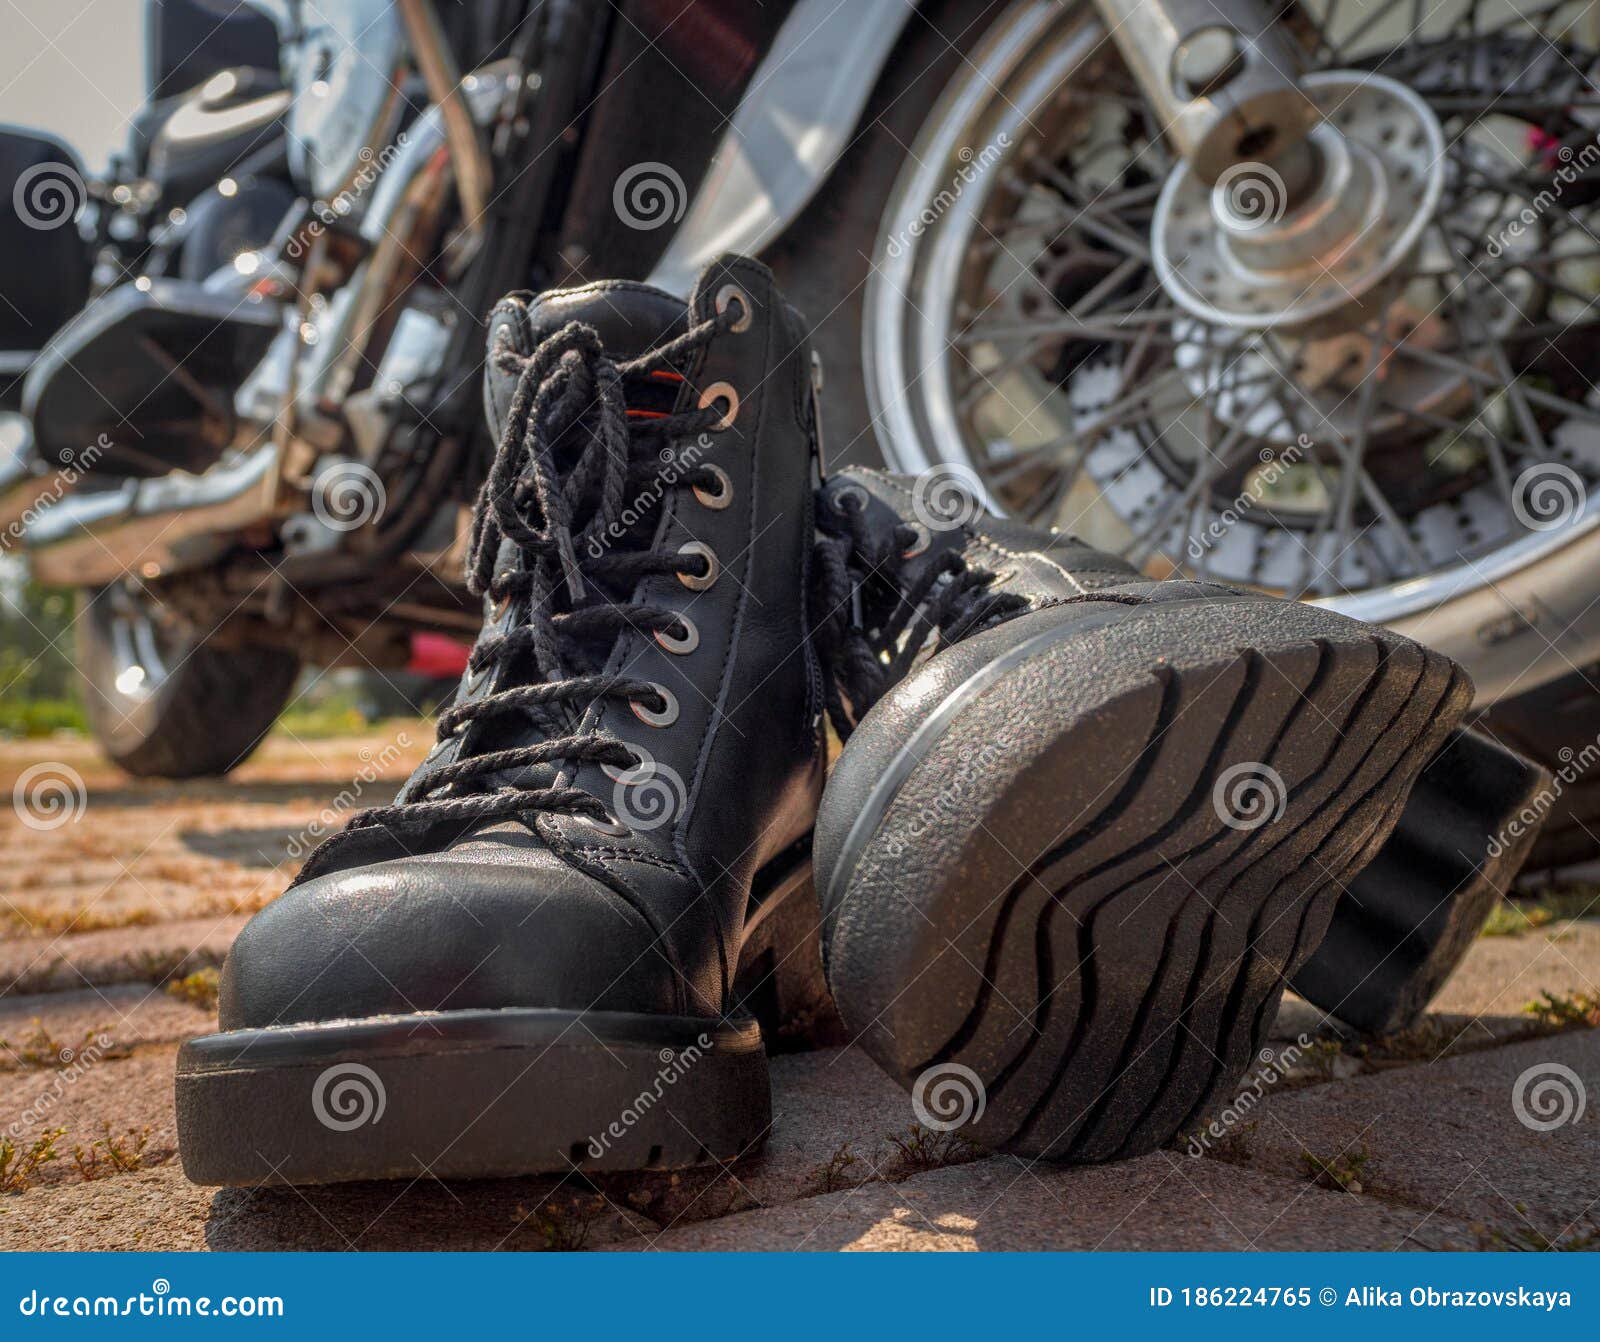 Biker Boots With Laces Close-up Standing Near The Wheel Of A Motorcycle ...